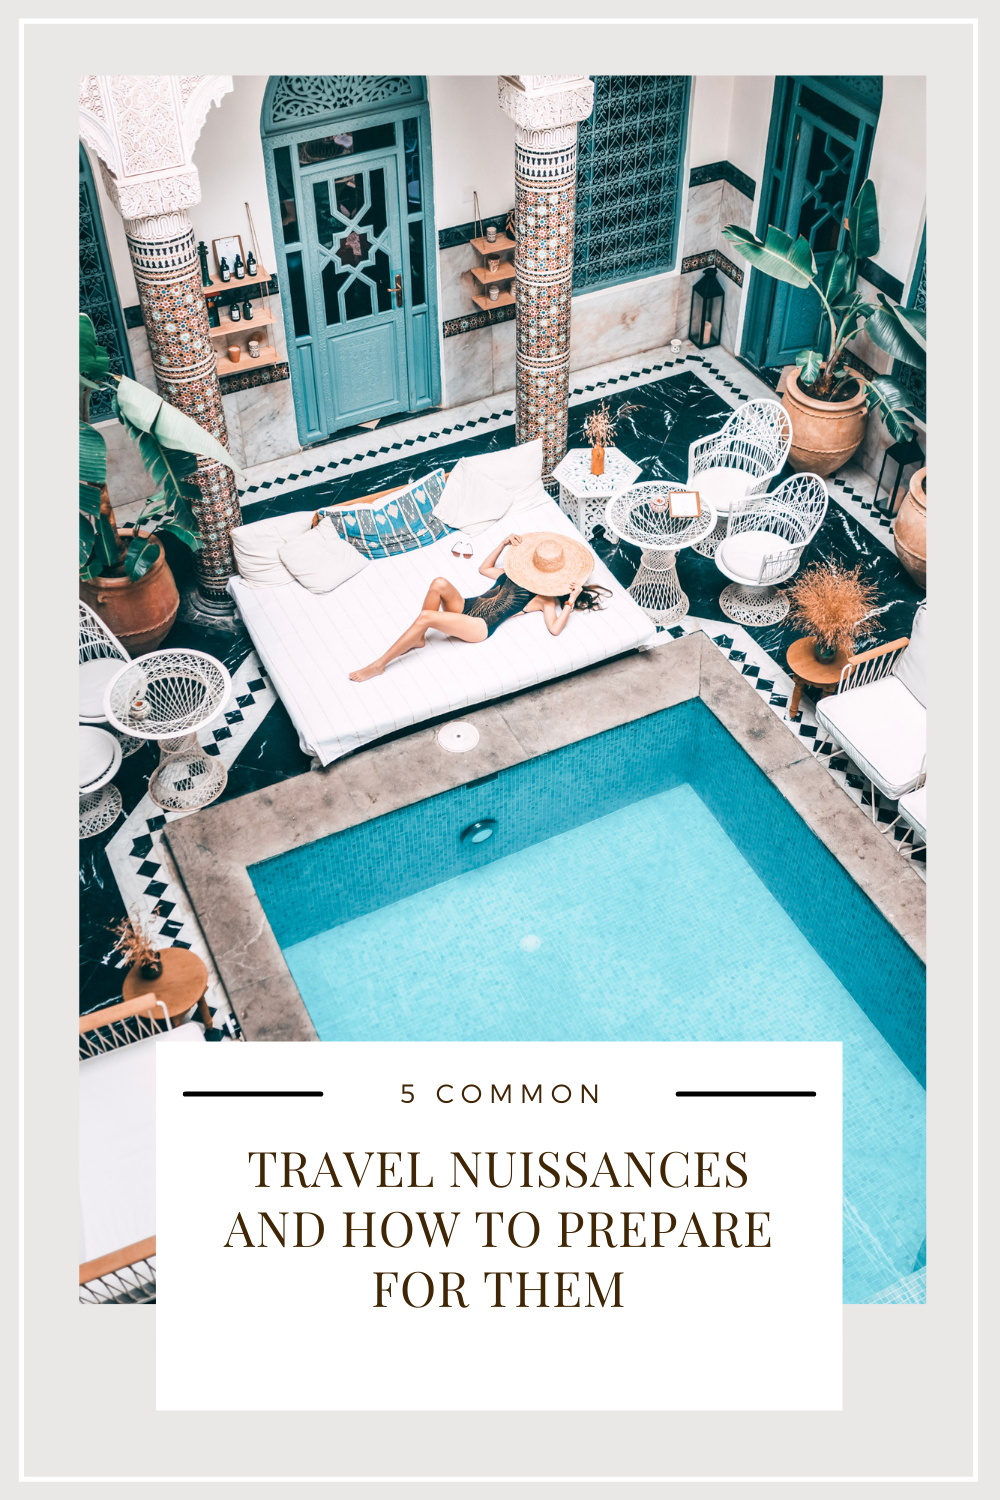 A woman lays by the side of the pool of one of the most iconic resorts in Morocco. This article covers common travel nuisances and how to prepare for them.